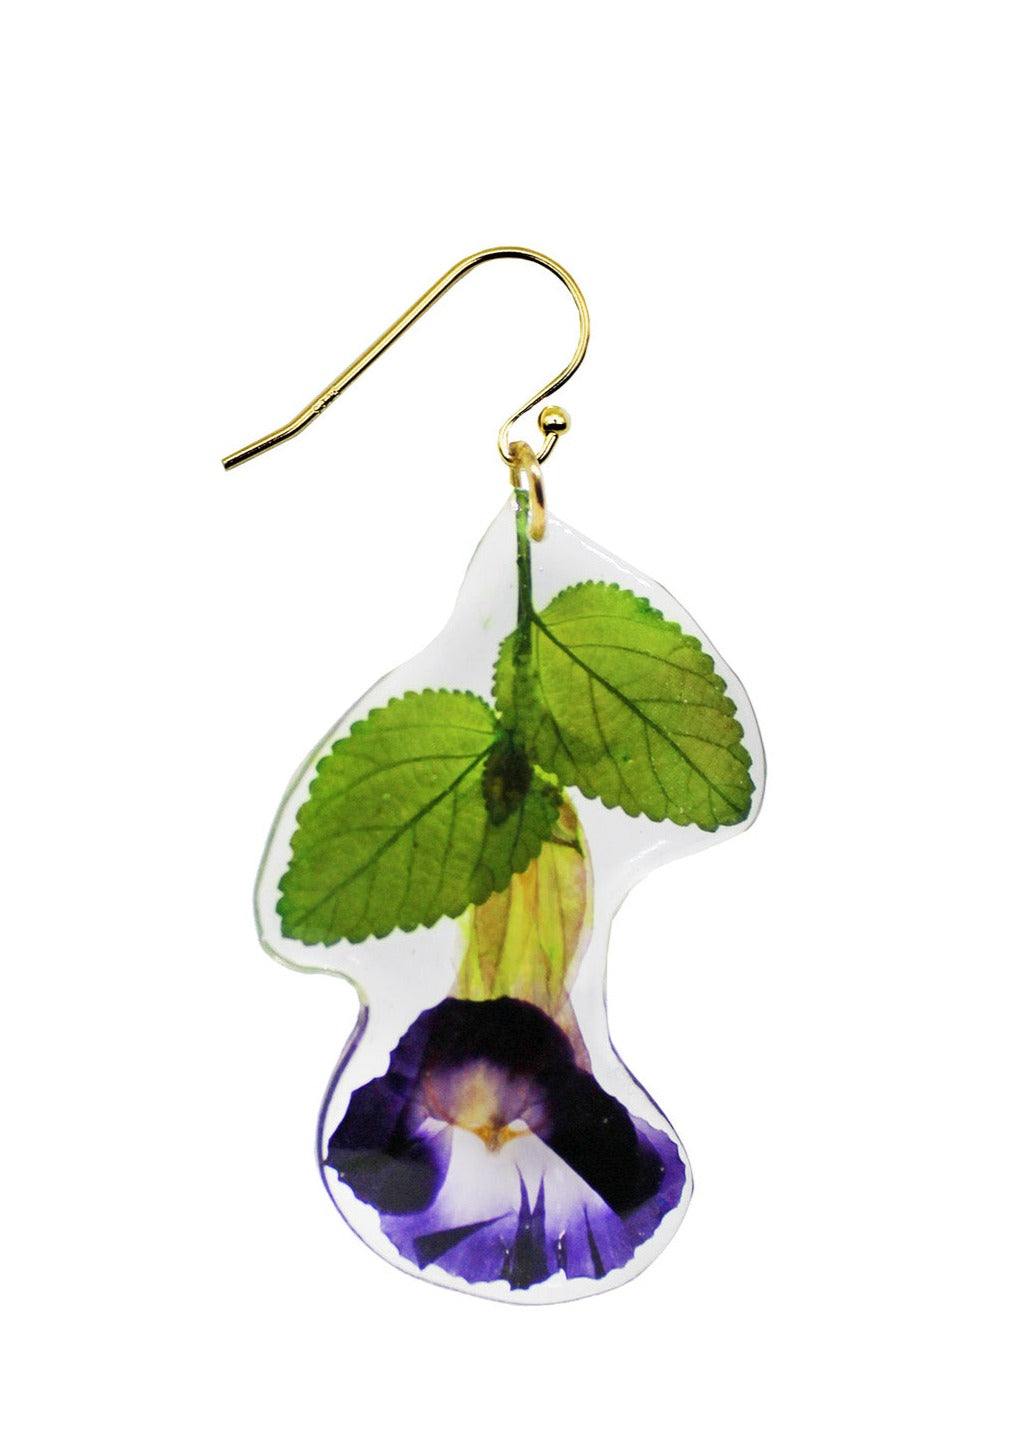 Resin Coated Purple Wishbone Flower with Green Stem on a French Hook Earring